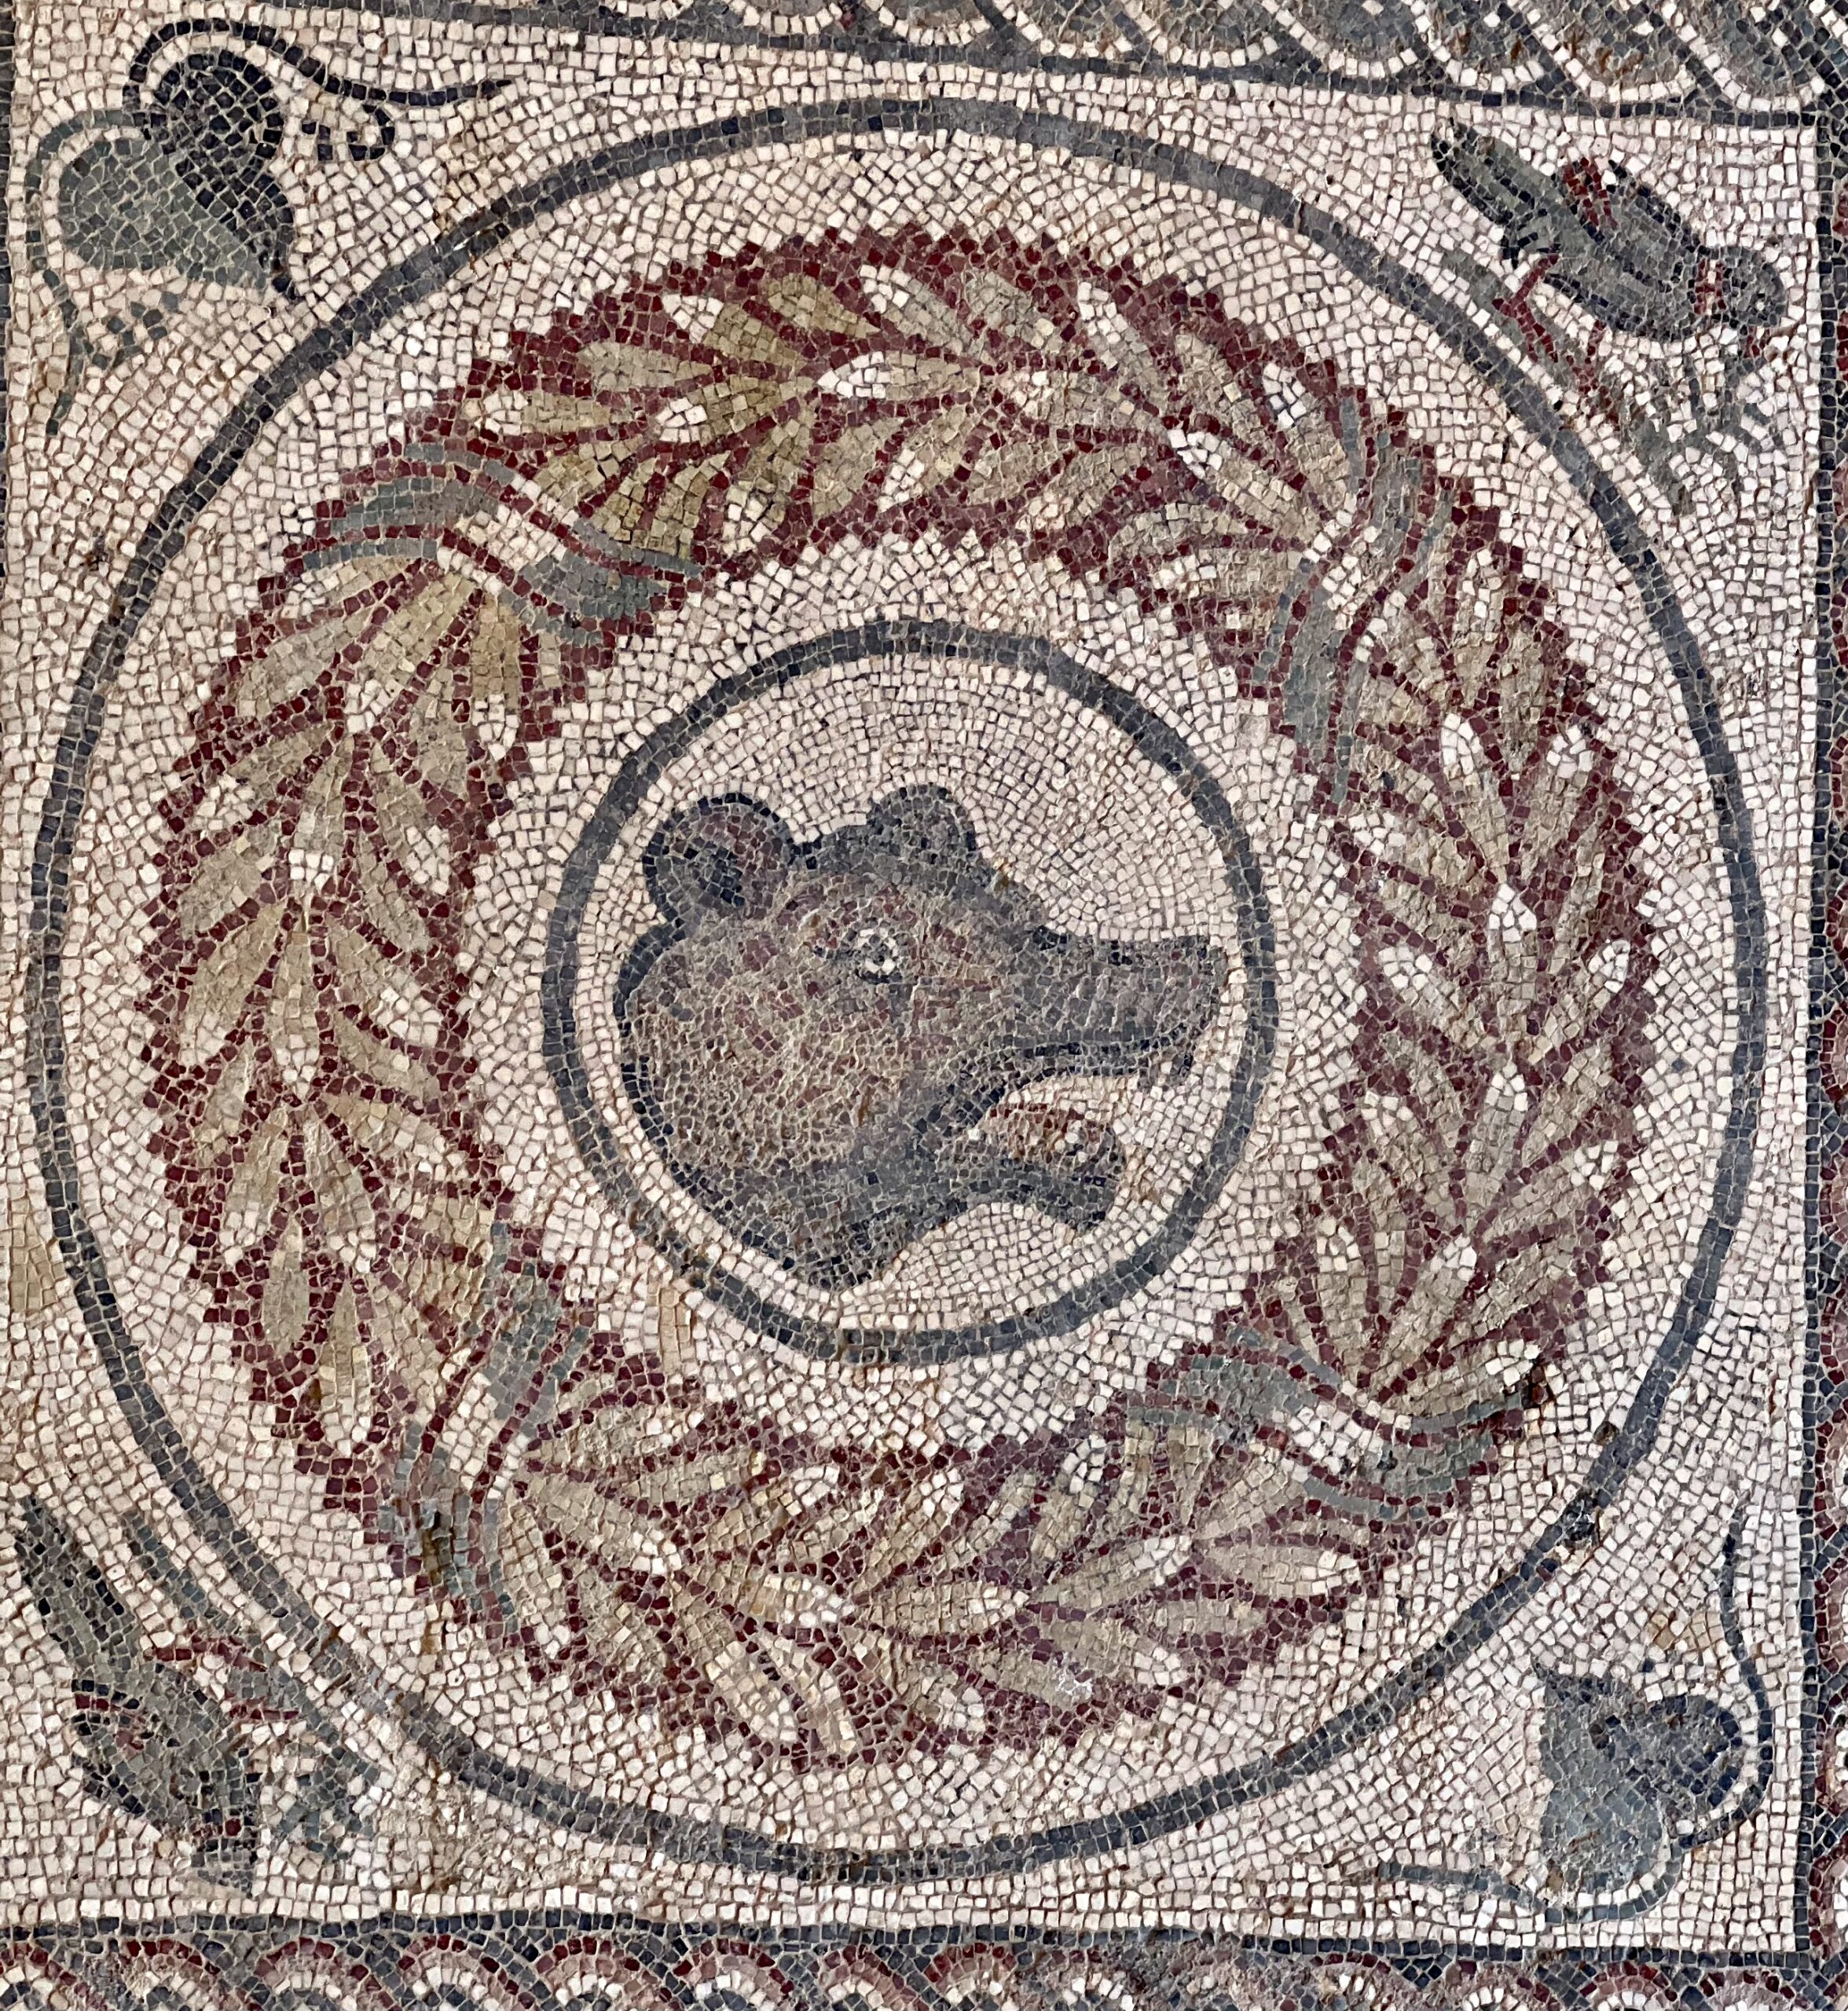 mosaic of a bear in the peristyle